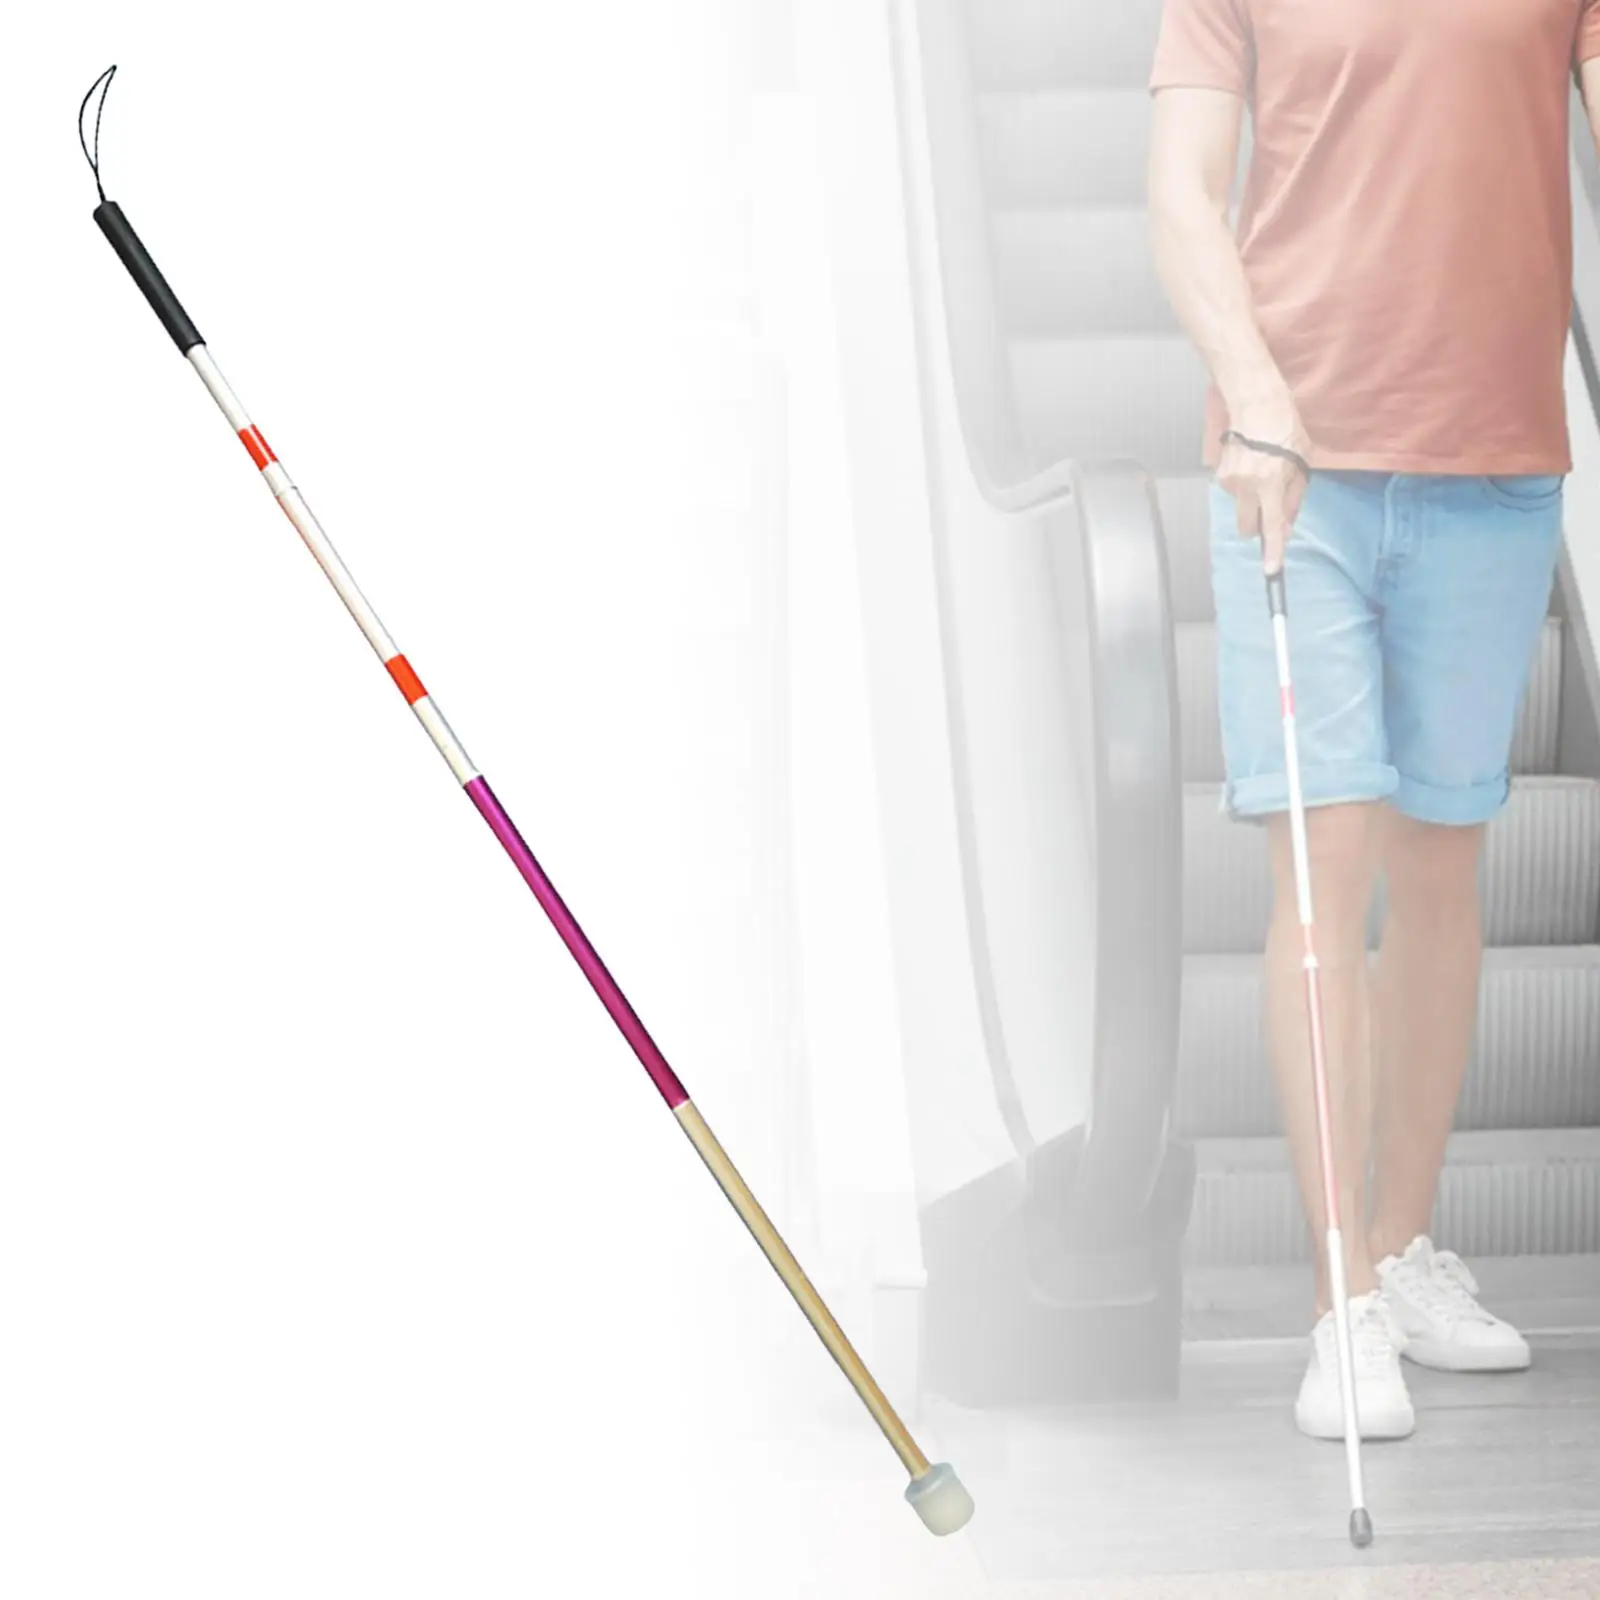 Portable Folding Mobility Cane Reflective Balancing Mobility Aid Lightweight 4 Section Walking Stick for Blind Vision Impaired